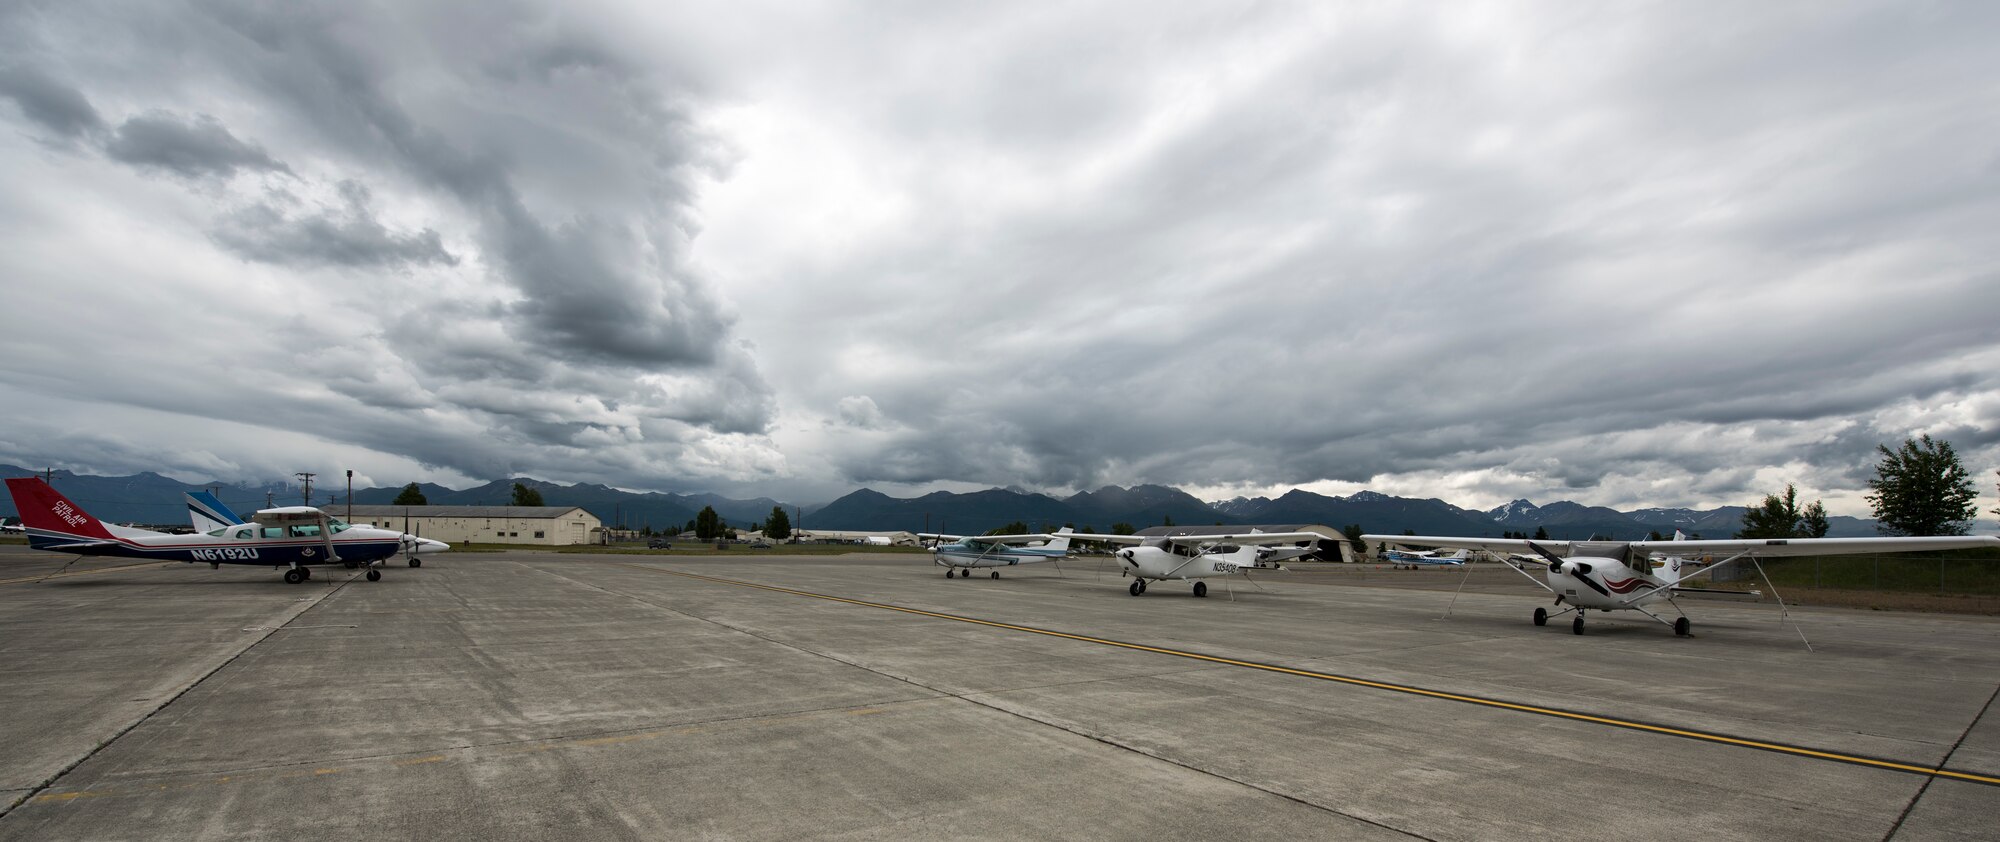 Elmendorf Aero Club General Aviation and privately owned airplanes are parked in rentable spaces near the clubs’ hangar at Joint Base Elmendorf-Richardson, Alaska, June 28, 2018. The club has more than 15 rentable spaces available outside and five inside for personal aircraft storage.